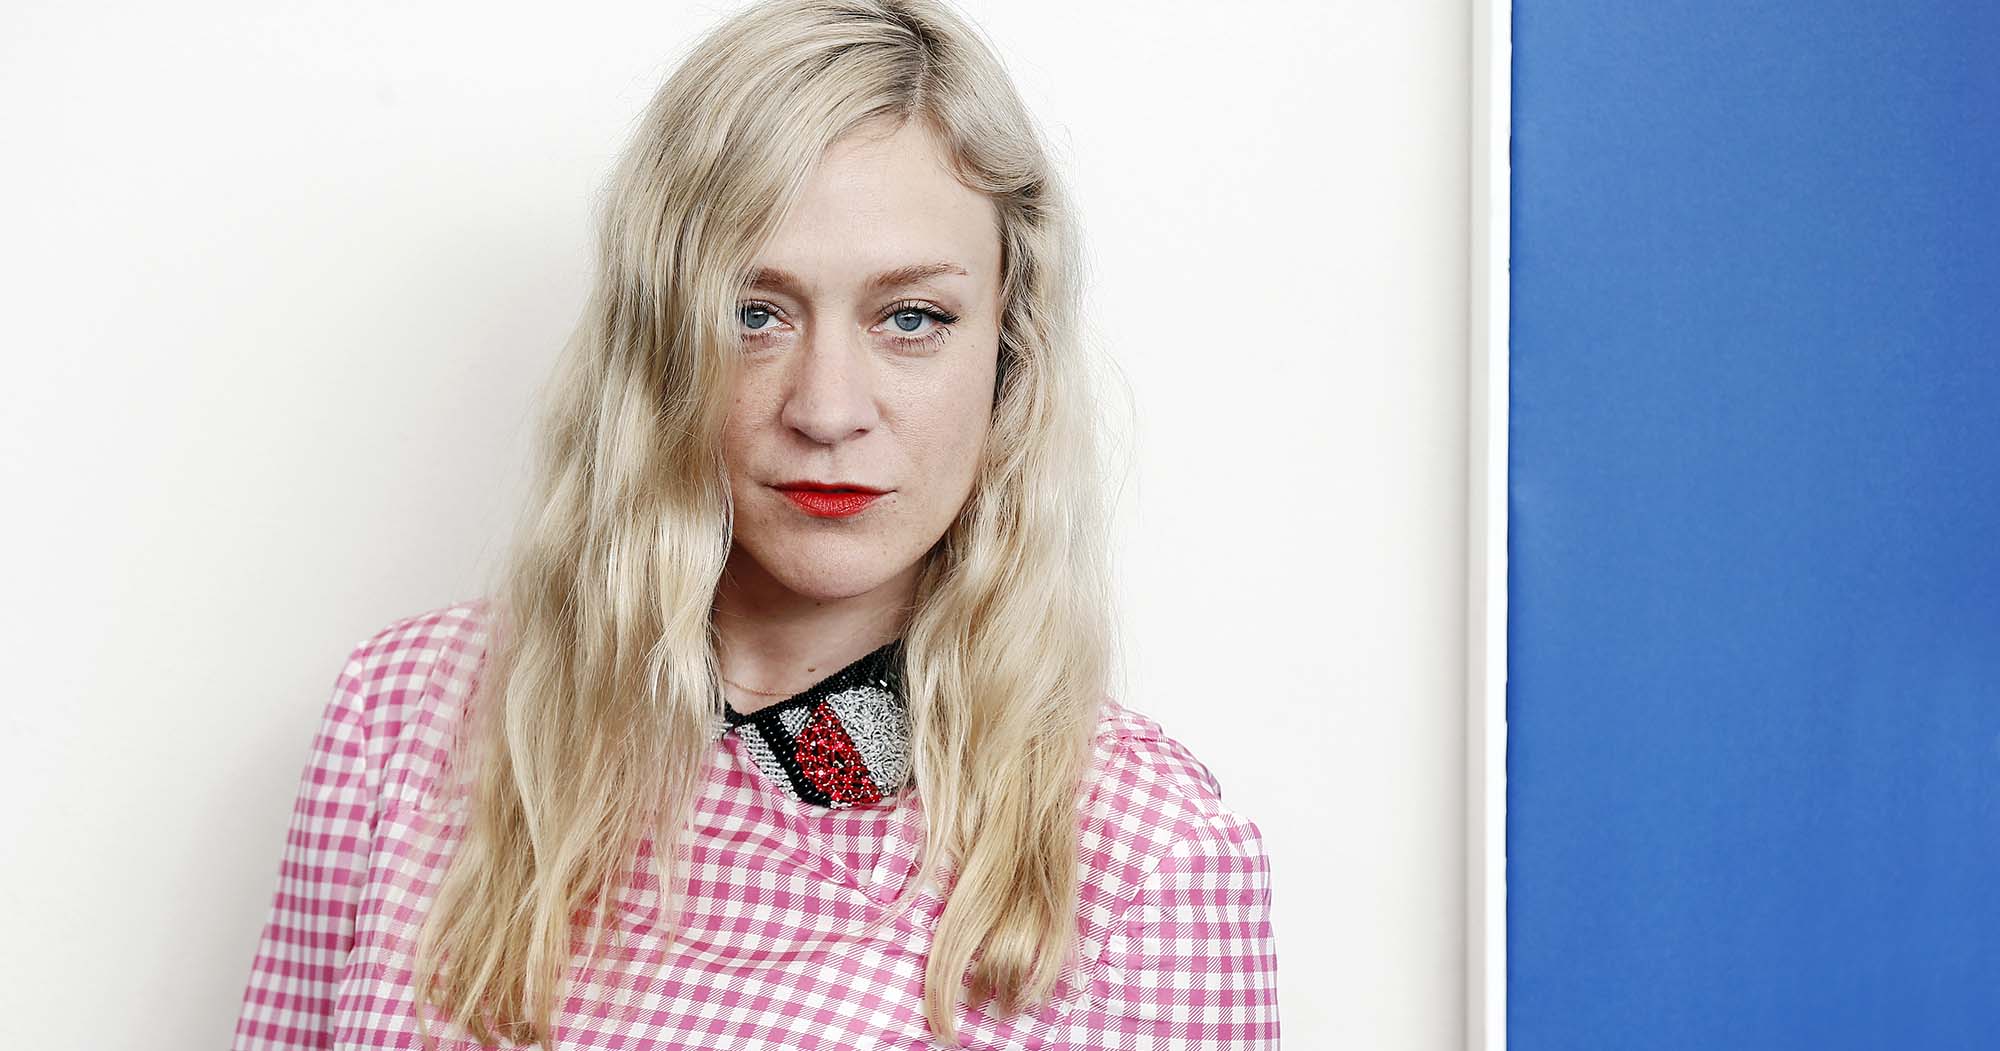 Chloë Sevigny has portrayed weird, wonderful, and sexy roles with mixed results. Here are twelve of her most memorable roles, ranked from worst to best.